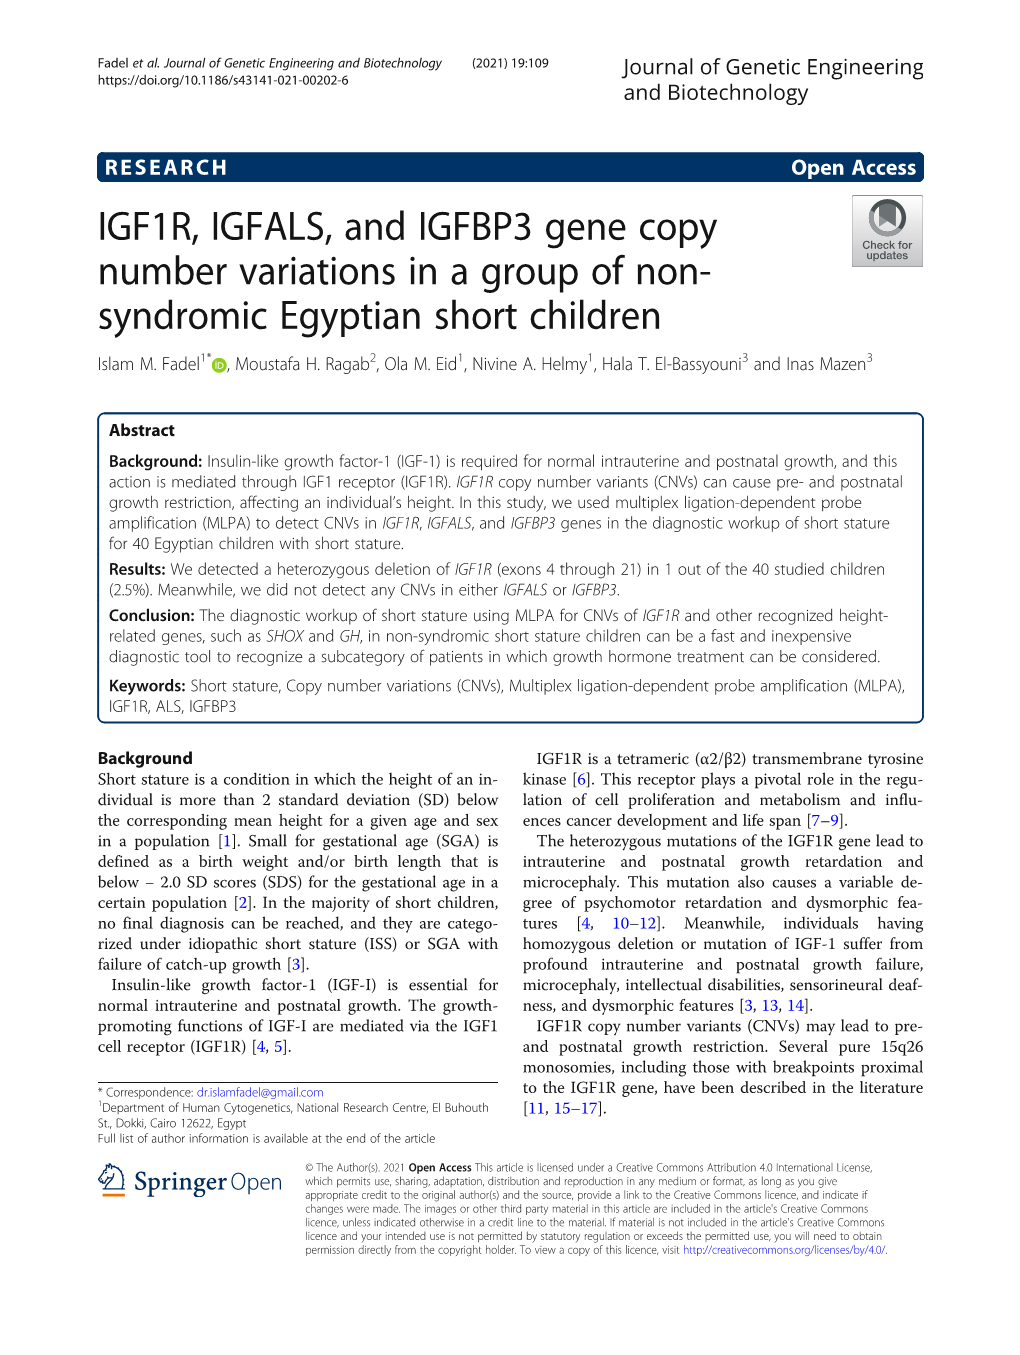 IGF1R, IGFALS, and IGFBP3 Gene Copy Number Variations in a Group of Non- Syndromic Egyptian Short Children Islam M